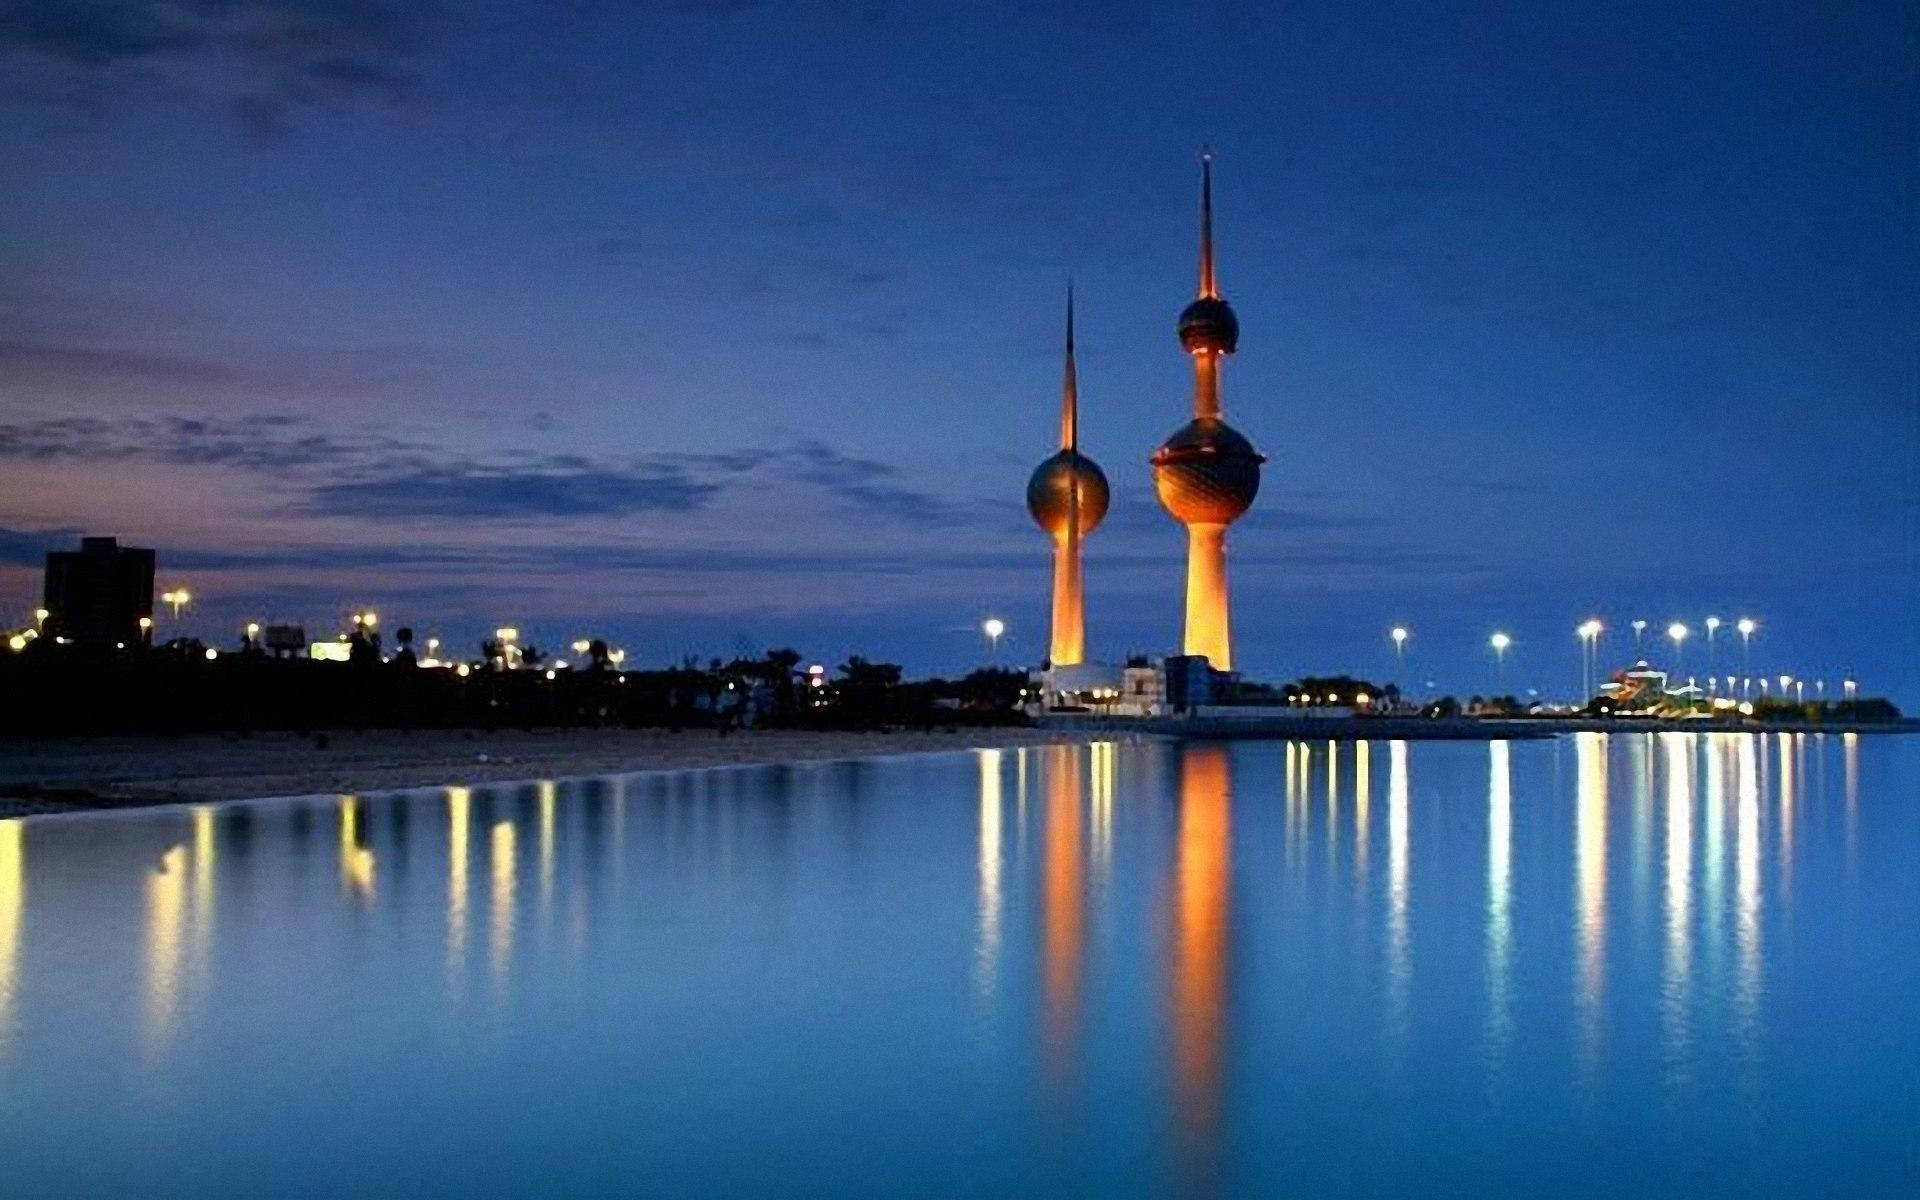 Kuwait Towers Reflected Lights